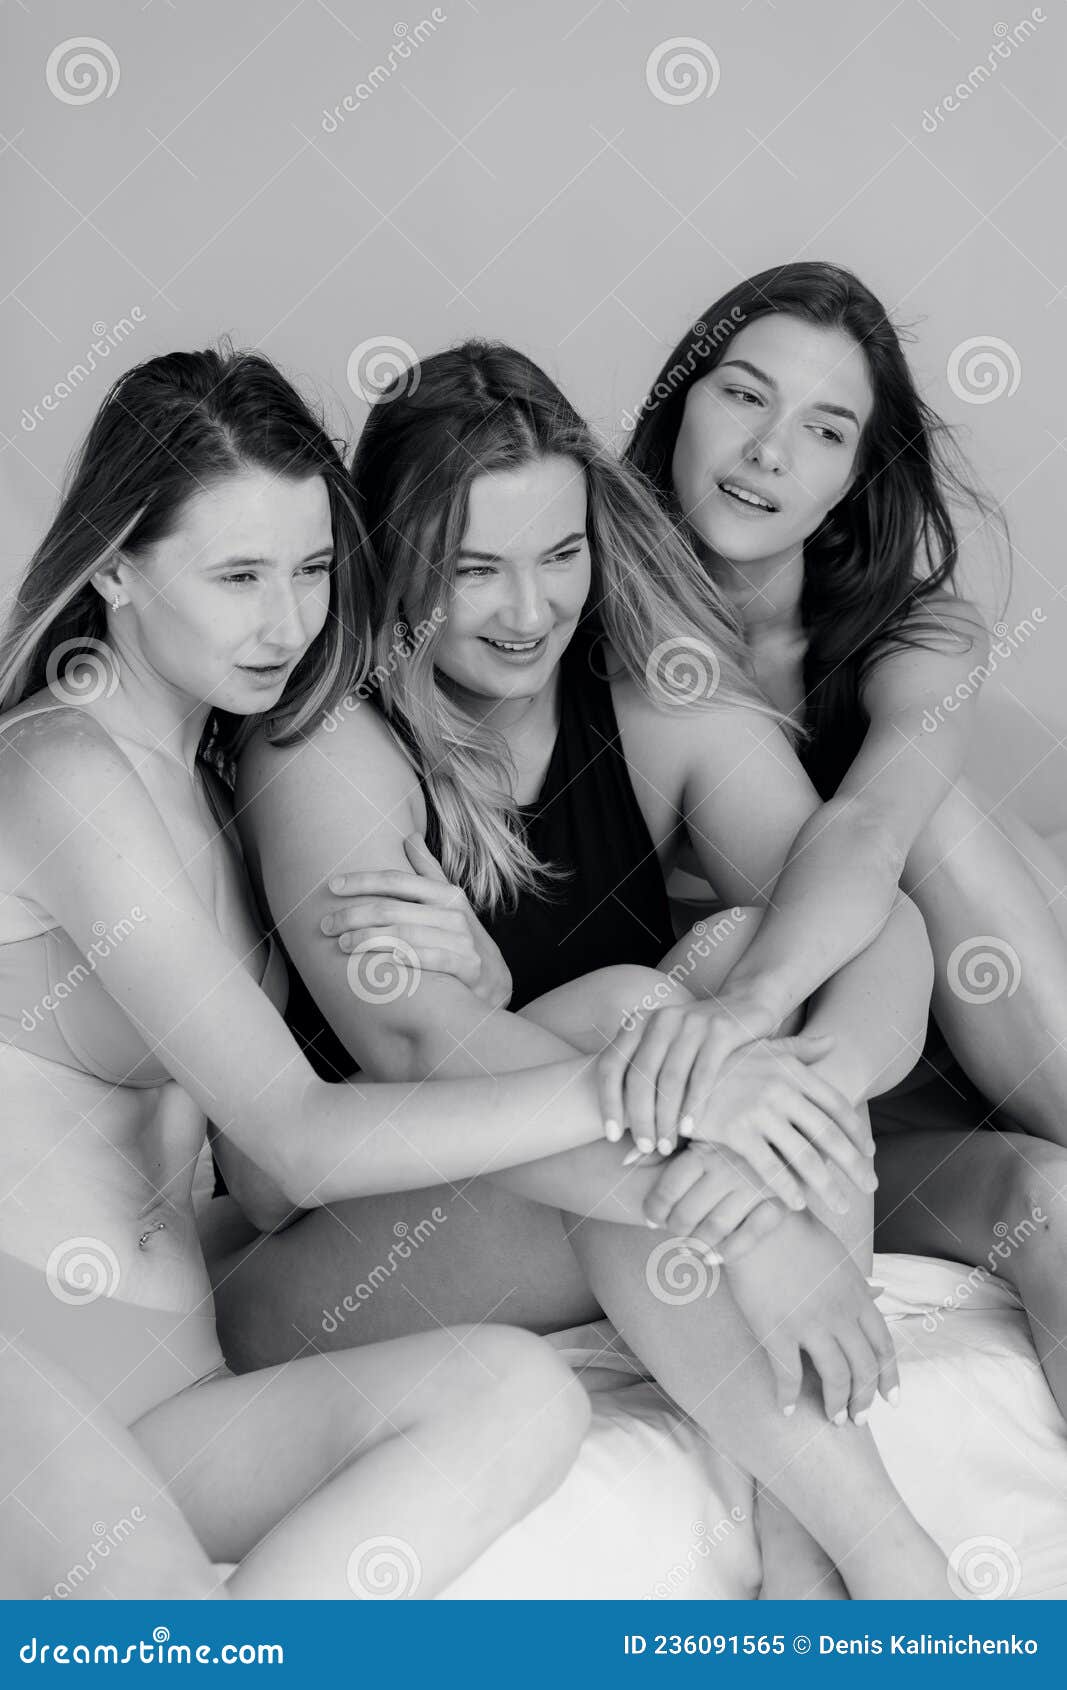 Group of Women Success, Diversity, Beauty, Body Positive and People Concept Stock Image picture